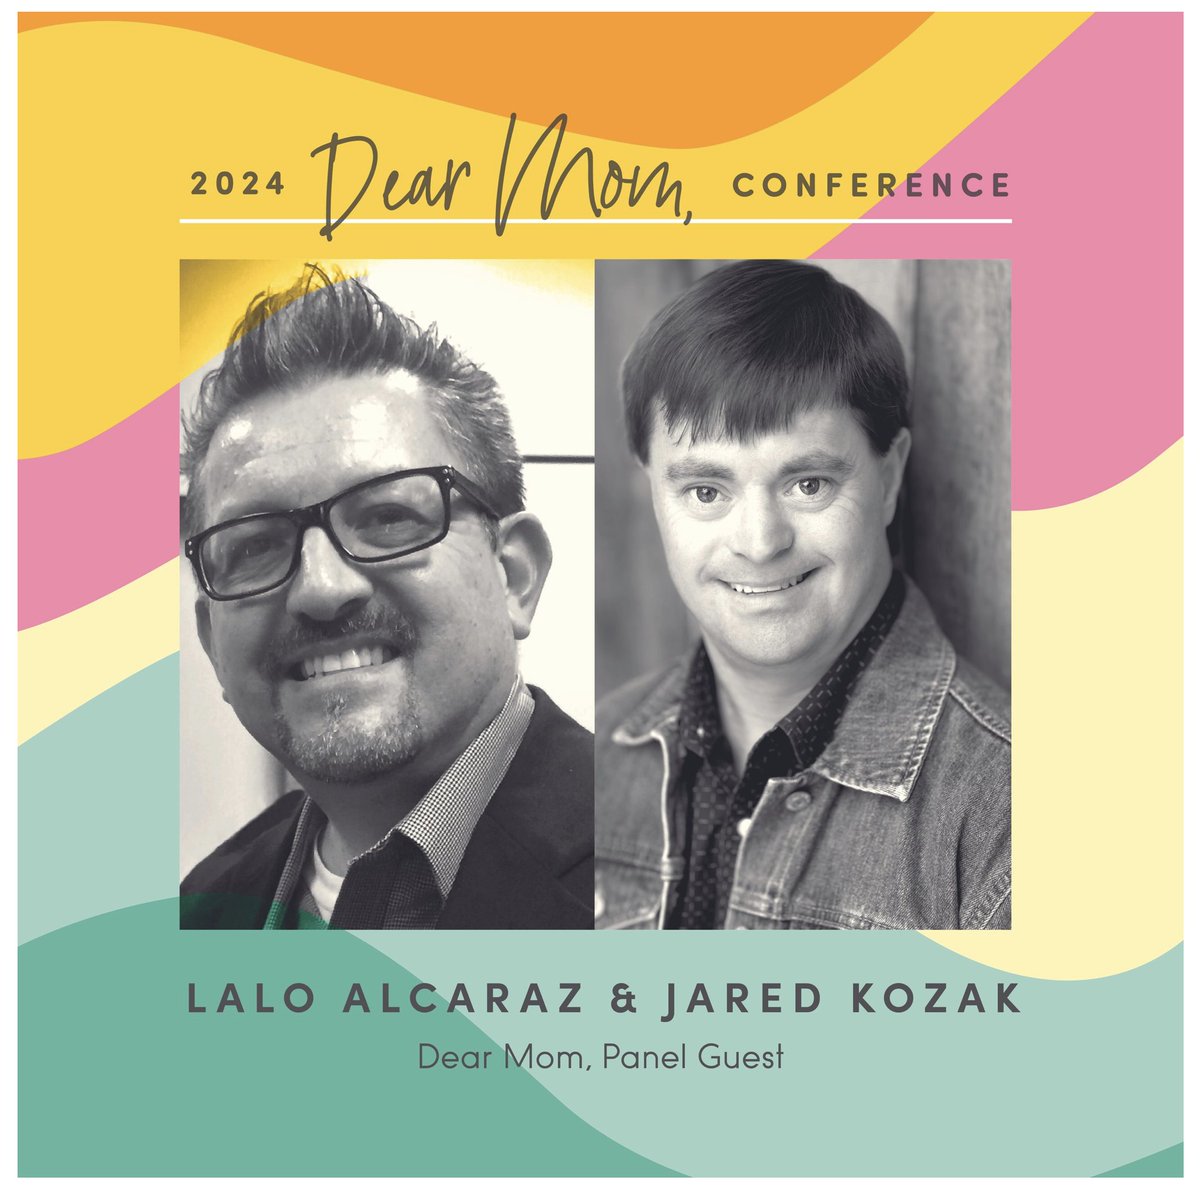 Sat. 4/13, I'll be a panelist alongside my colleague Jared Kodak (CJ from the Casagrandes) @ Dear Mom Conference 2024, Laguna Beach. Sharing my experiences working w Jared, the first Nickelodeon actor known to have Down syndrome, and also a hilarious guy! dearmomco.com/conference